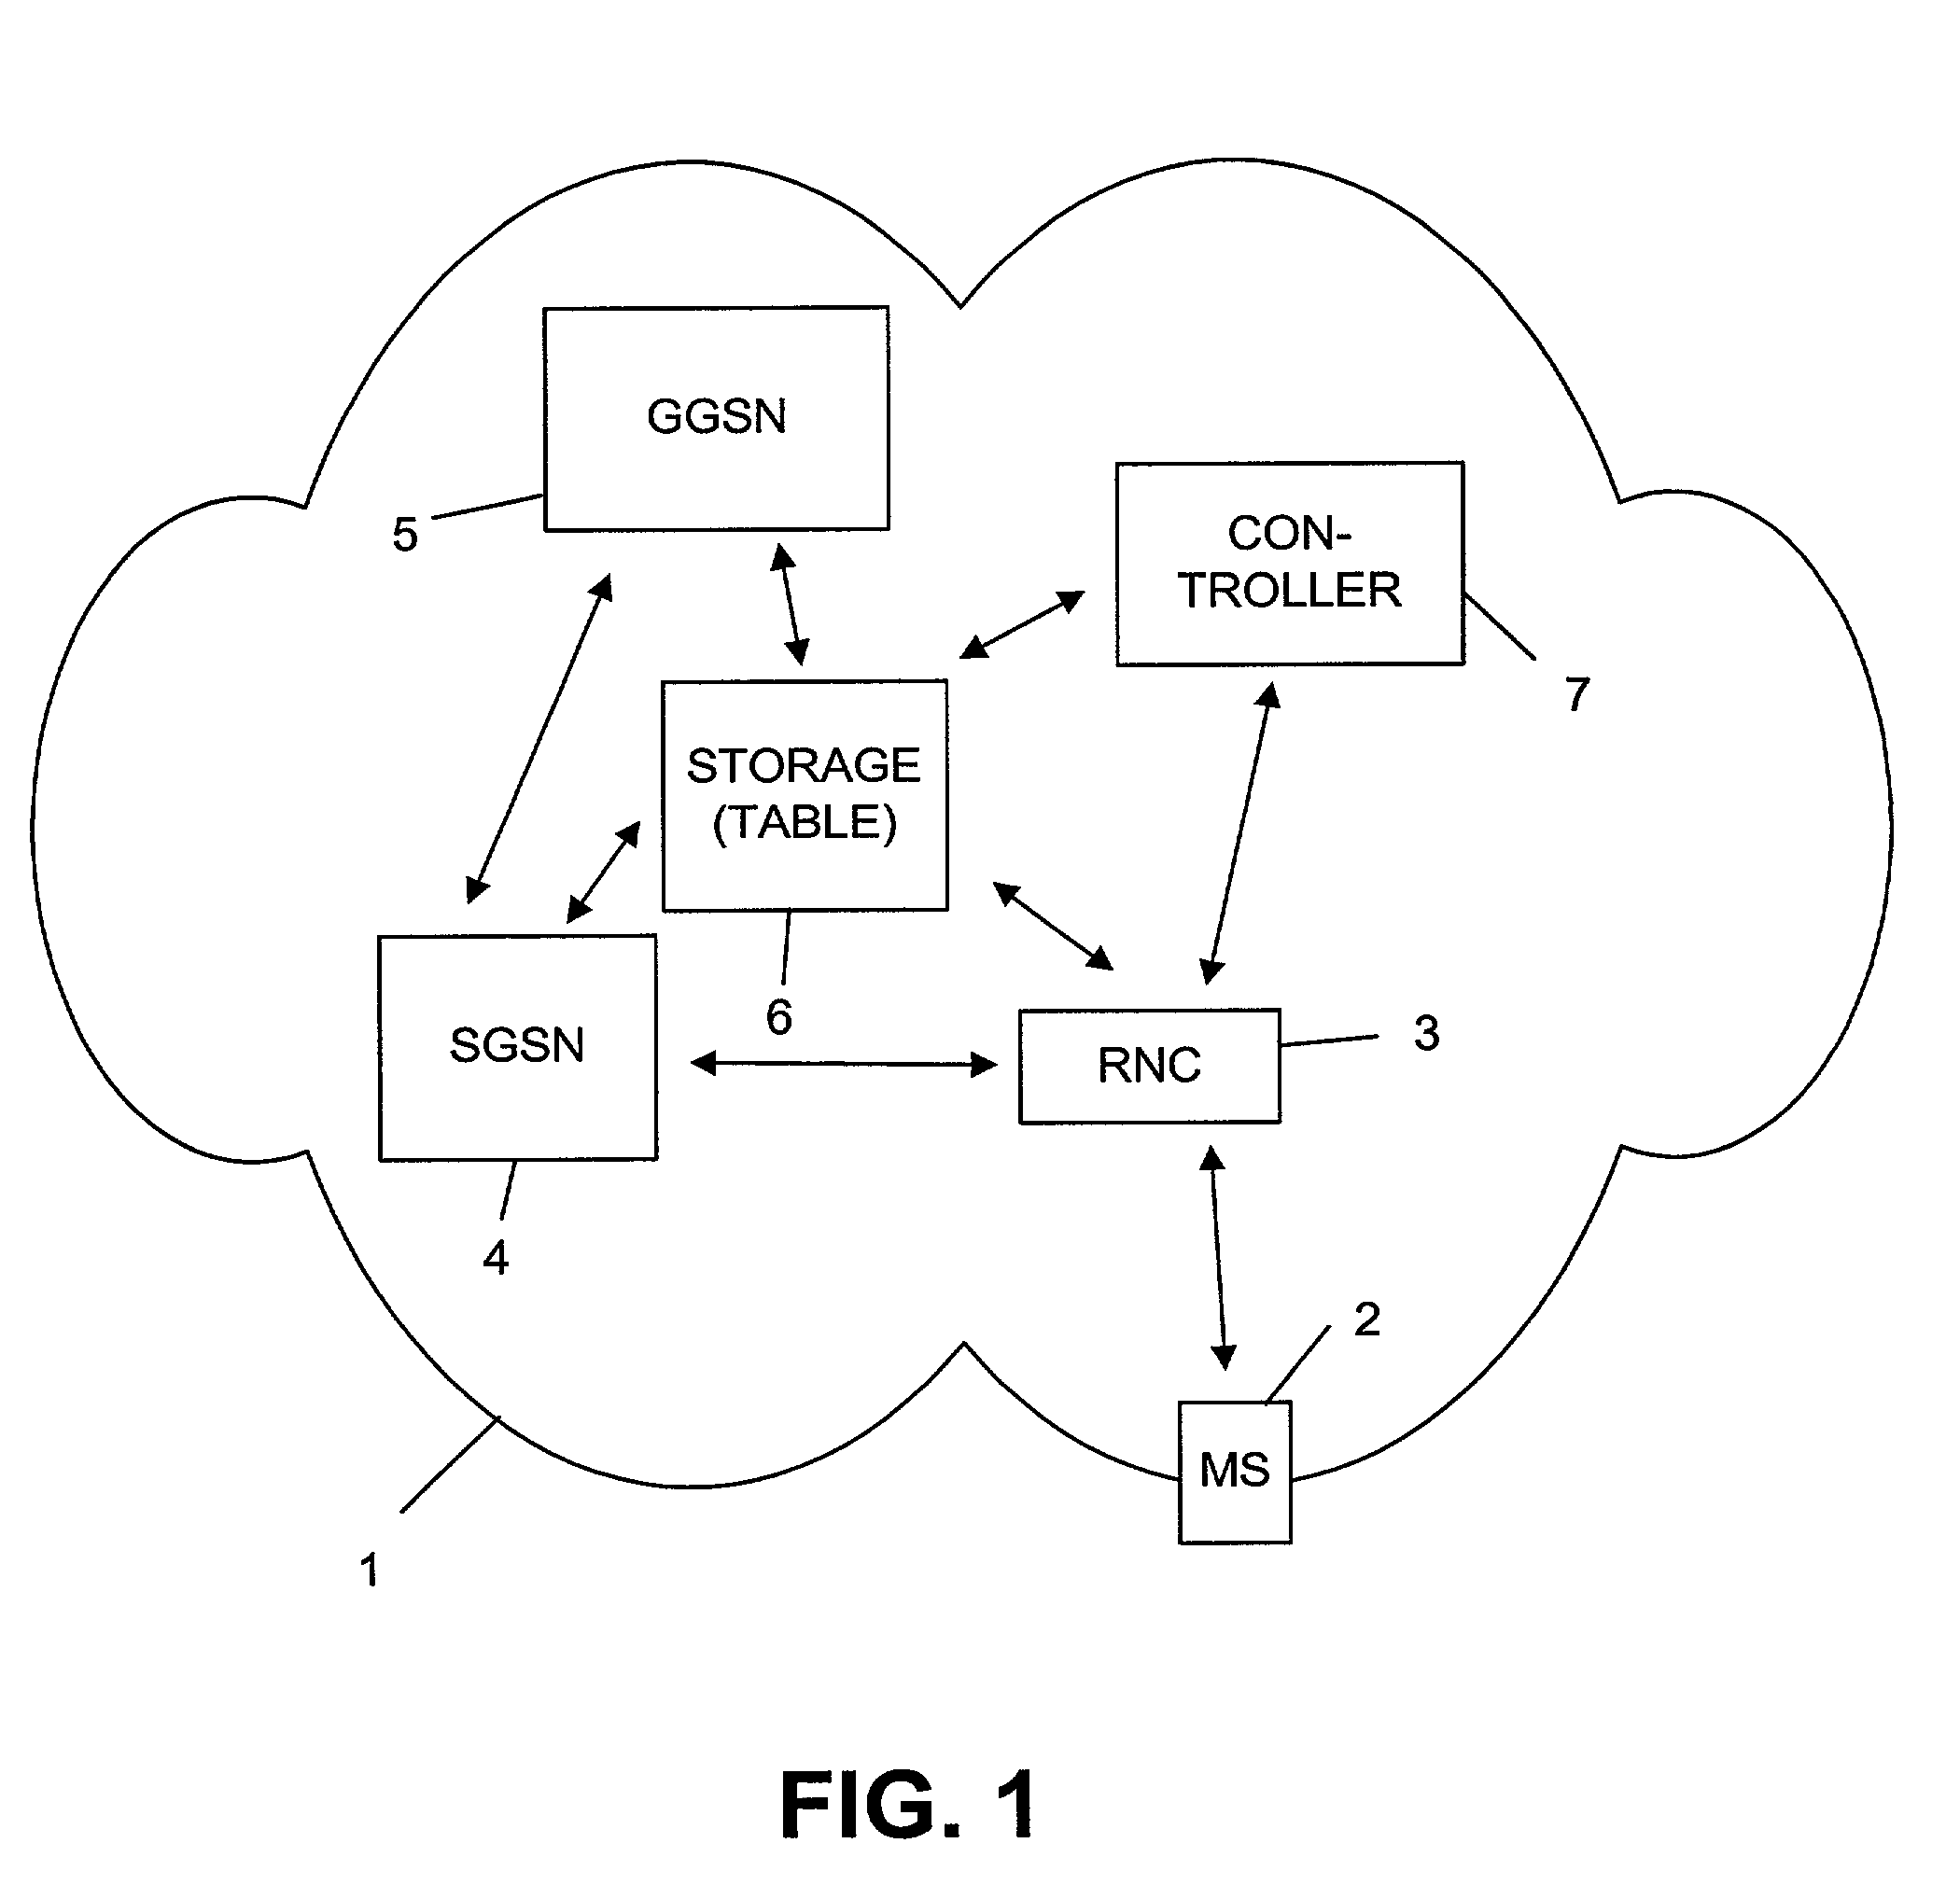 Method and system for service rate allocation, traffic learning process, and QoS provisioning measurement of traffic flows